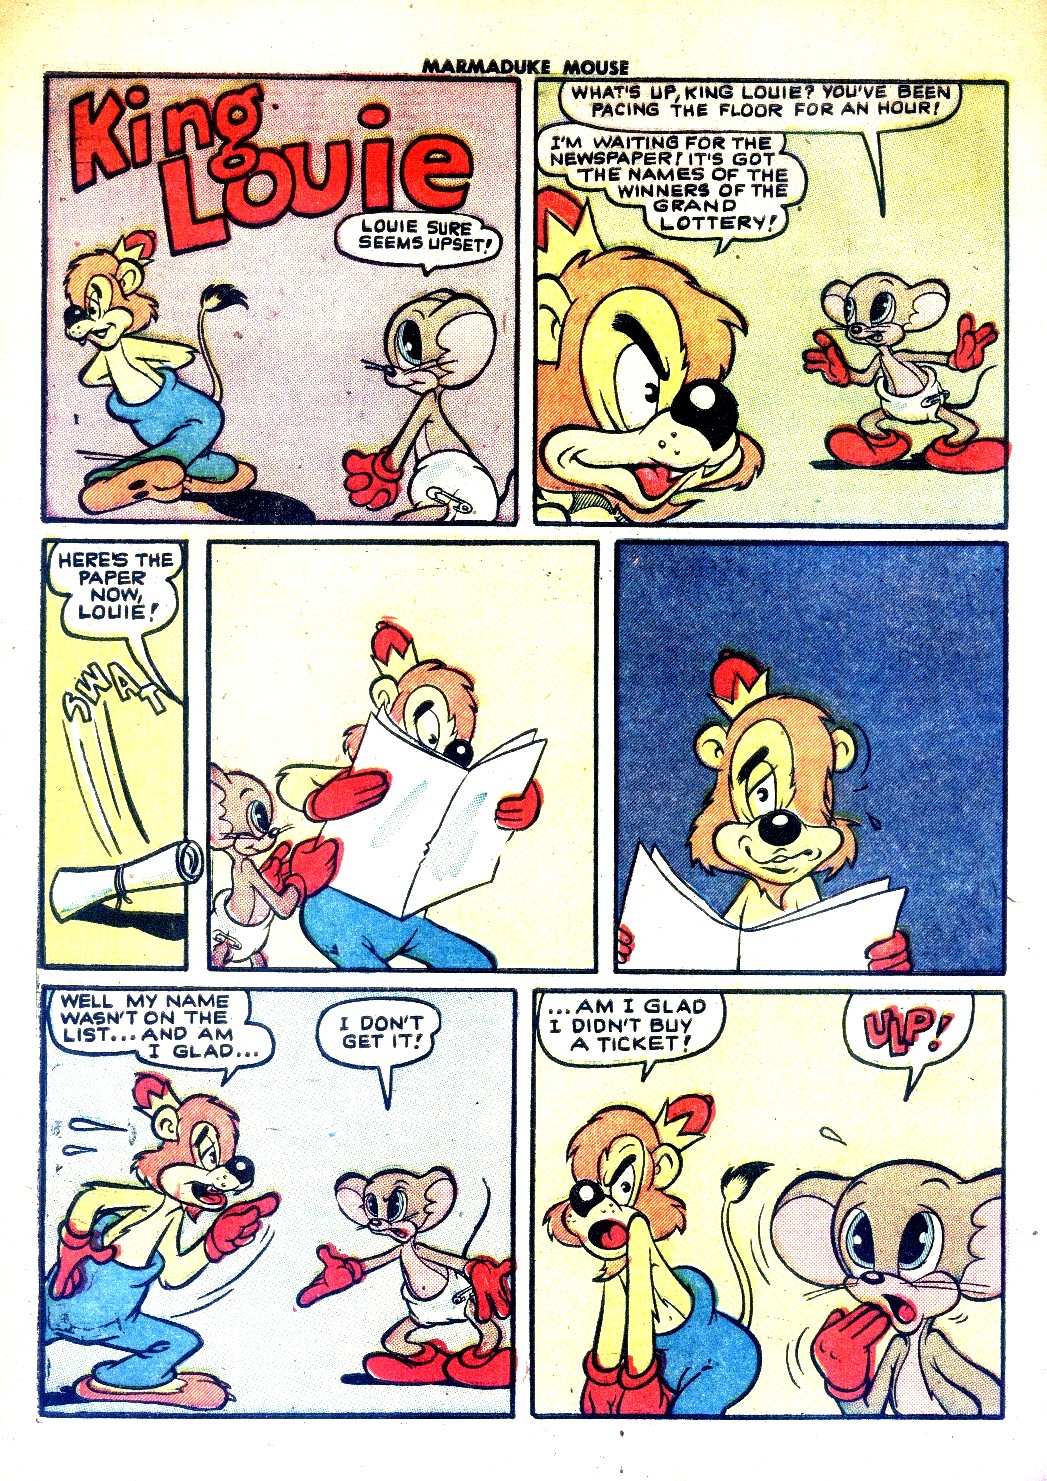 Read online Marmaduke Mouse comic -  Issue #31 - 28